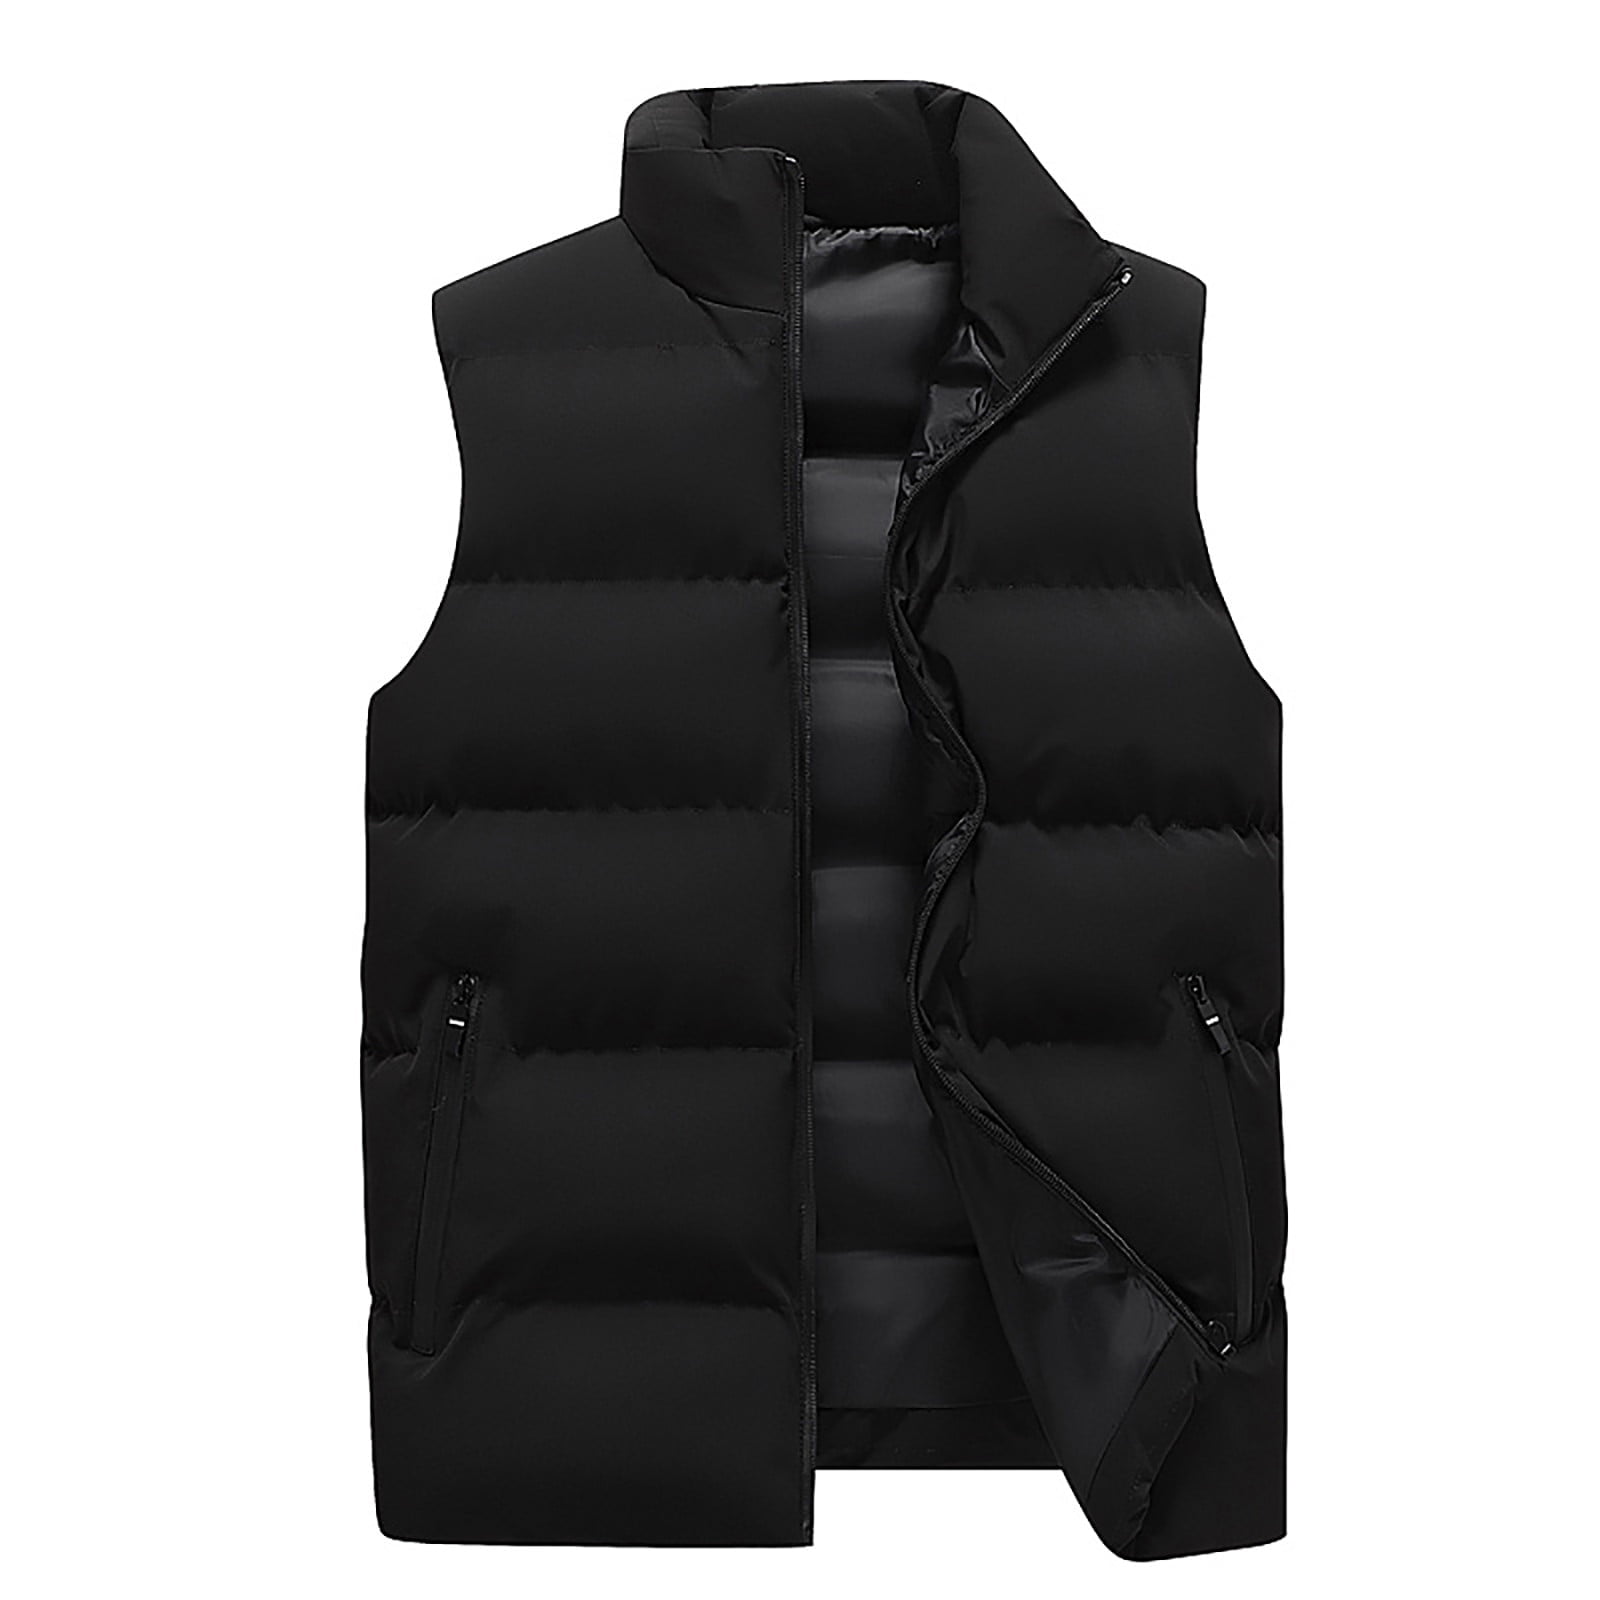 YYDGH Men's Winter Padded Puffer Vest Outdoor Stand Collar Sleeveless  Jacket Warm Casual Work Travel Quilted Waistcoat Blue M